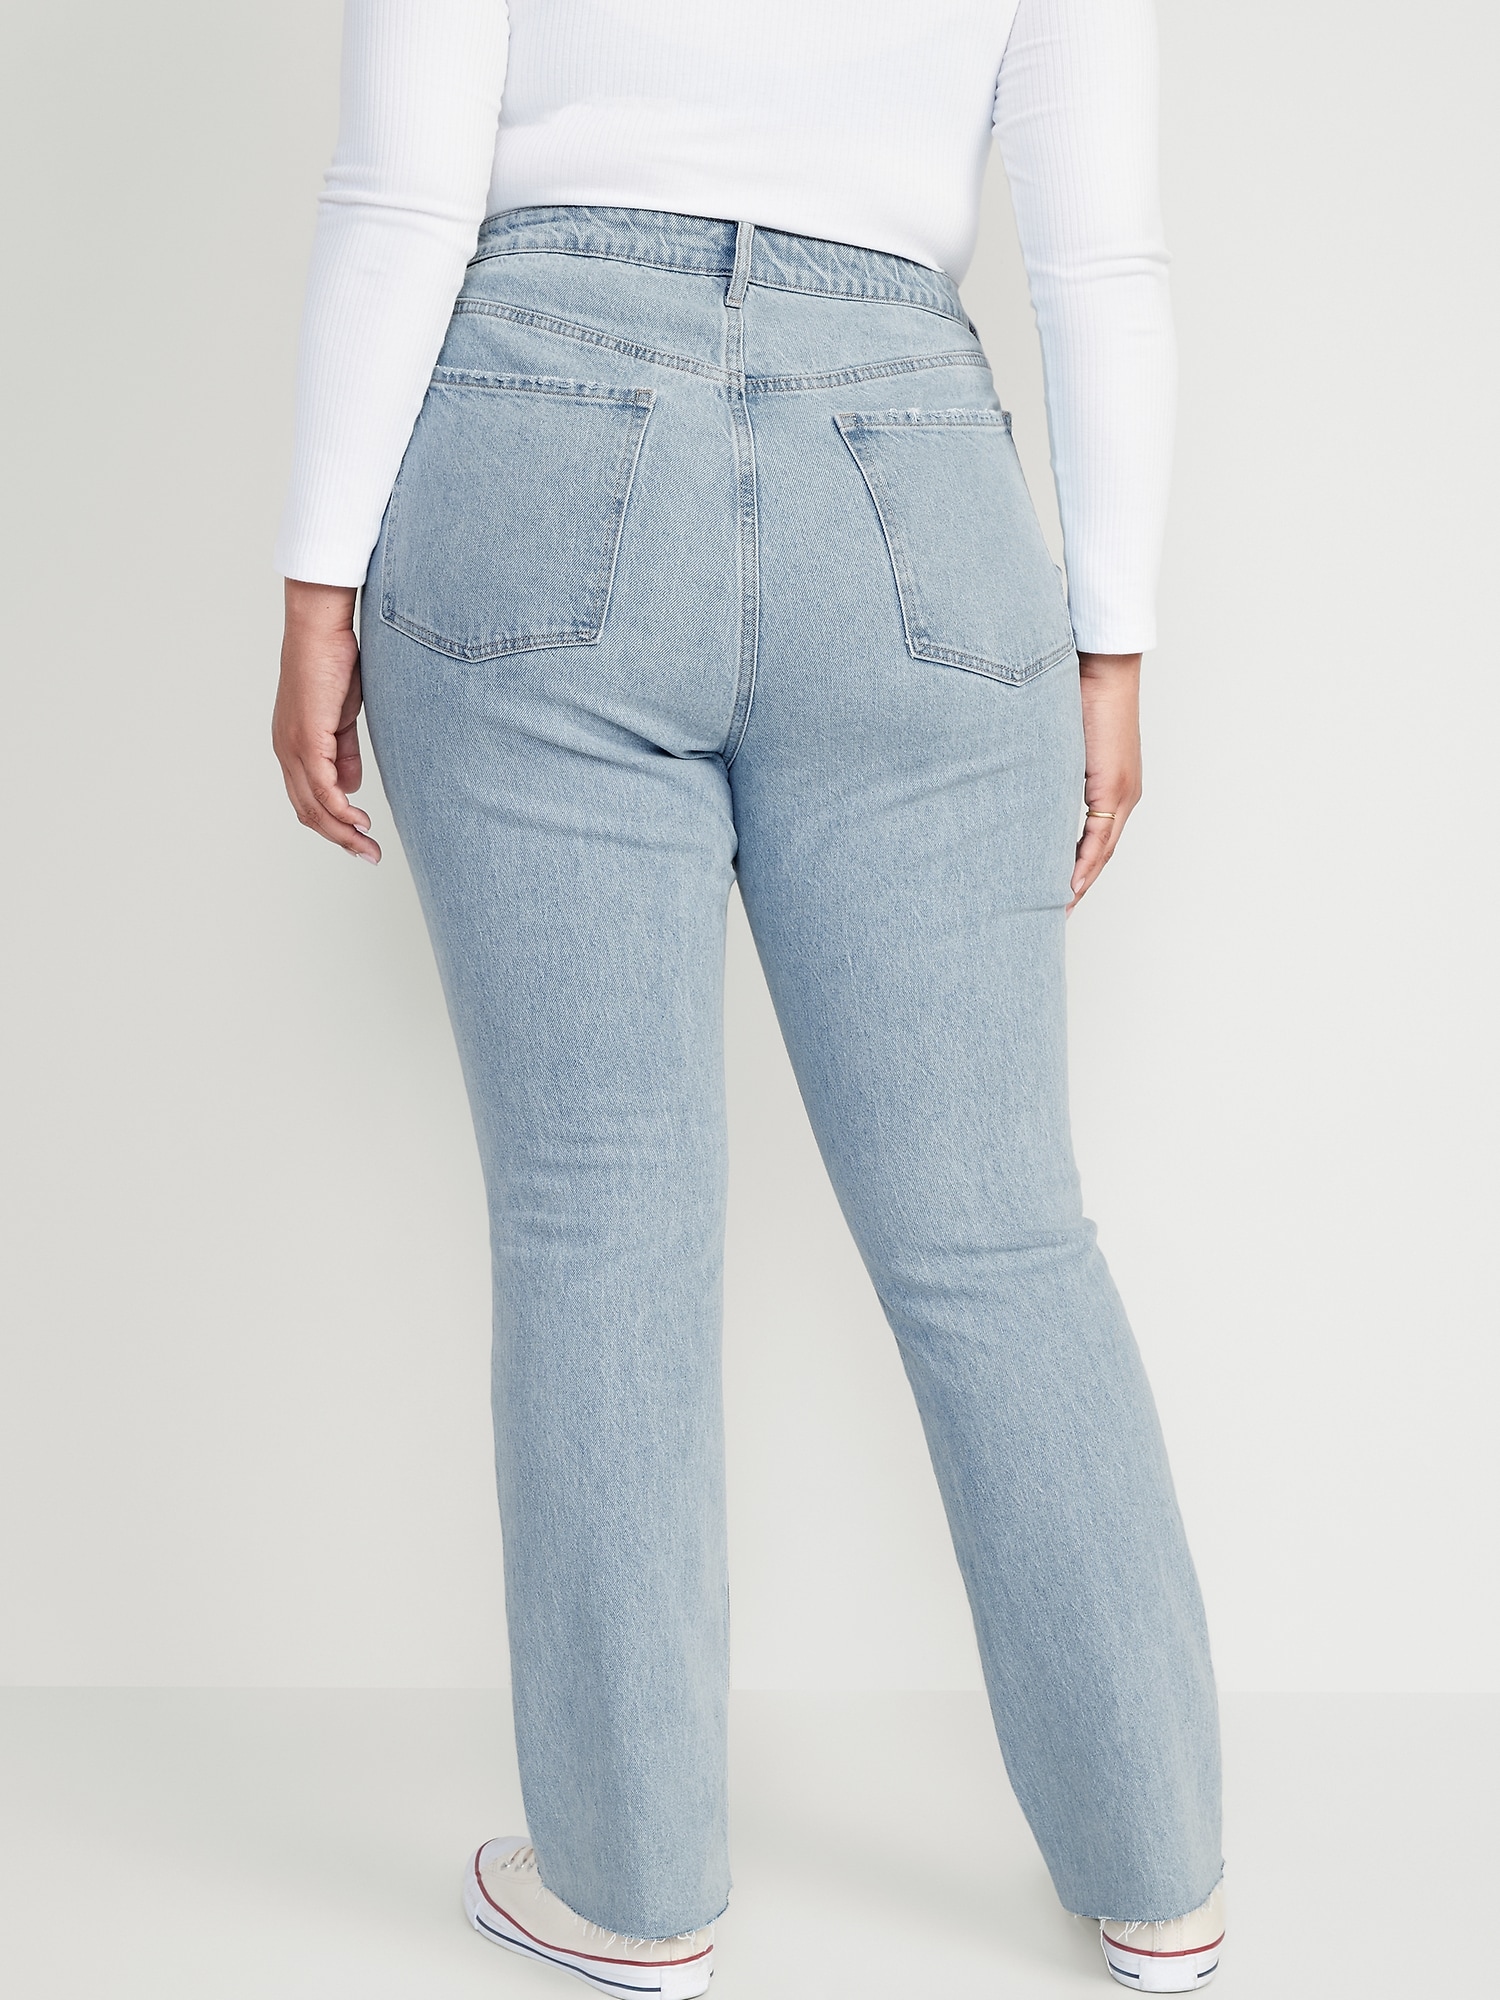 Extra High-Waisted Button-Fly Kicker Boot-Cut Cut-Off Jeans | Old Navy